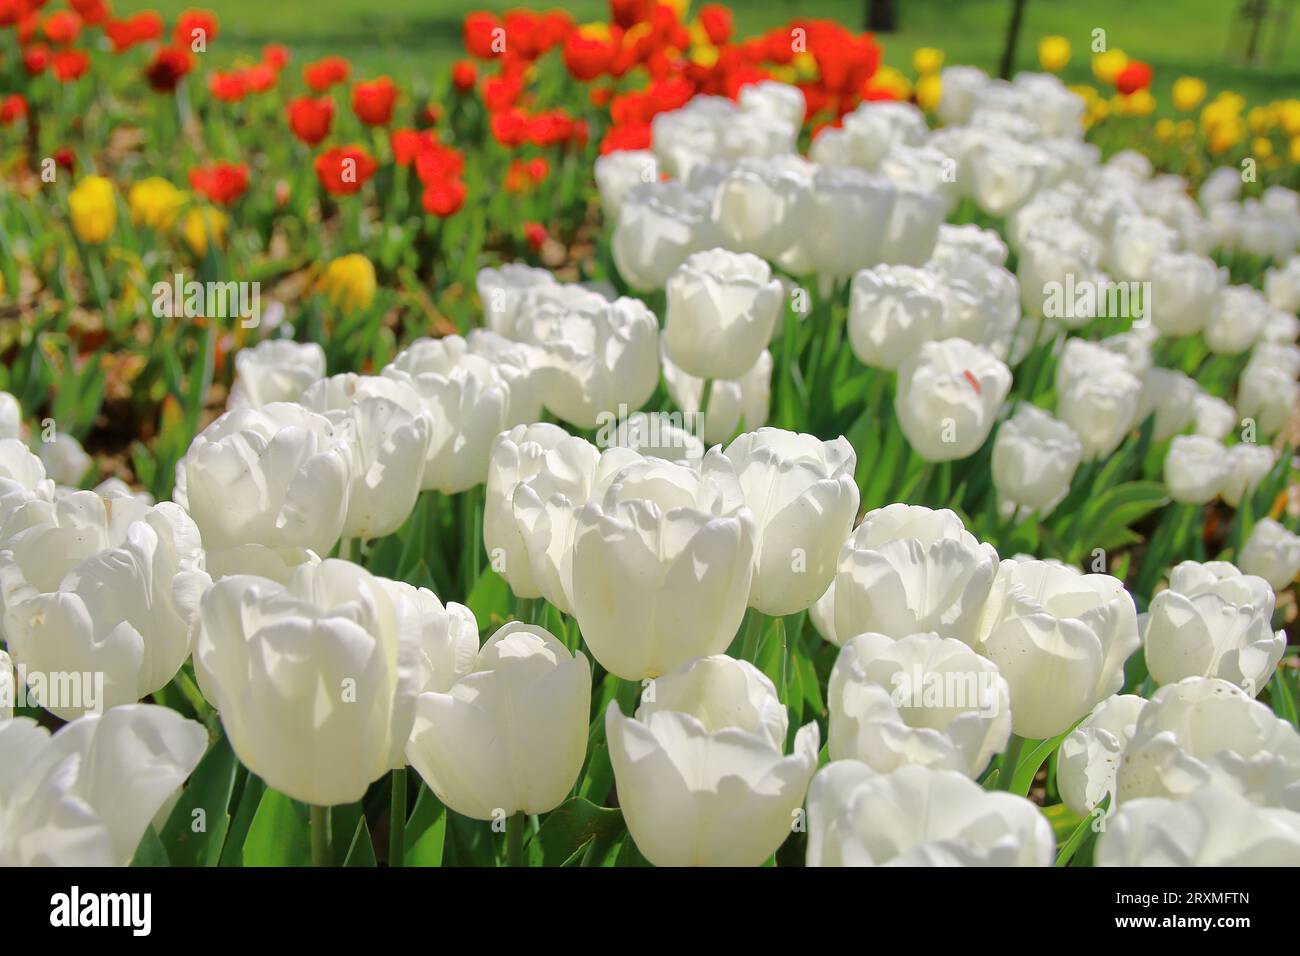 The picture was taken in the spring, in the city park of Istanbul. On the photo there are white tulips on the background of green grass and red tulips Stock Photo